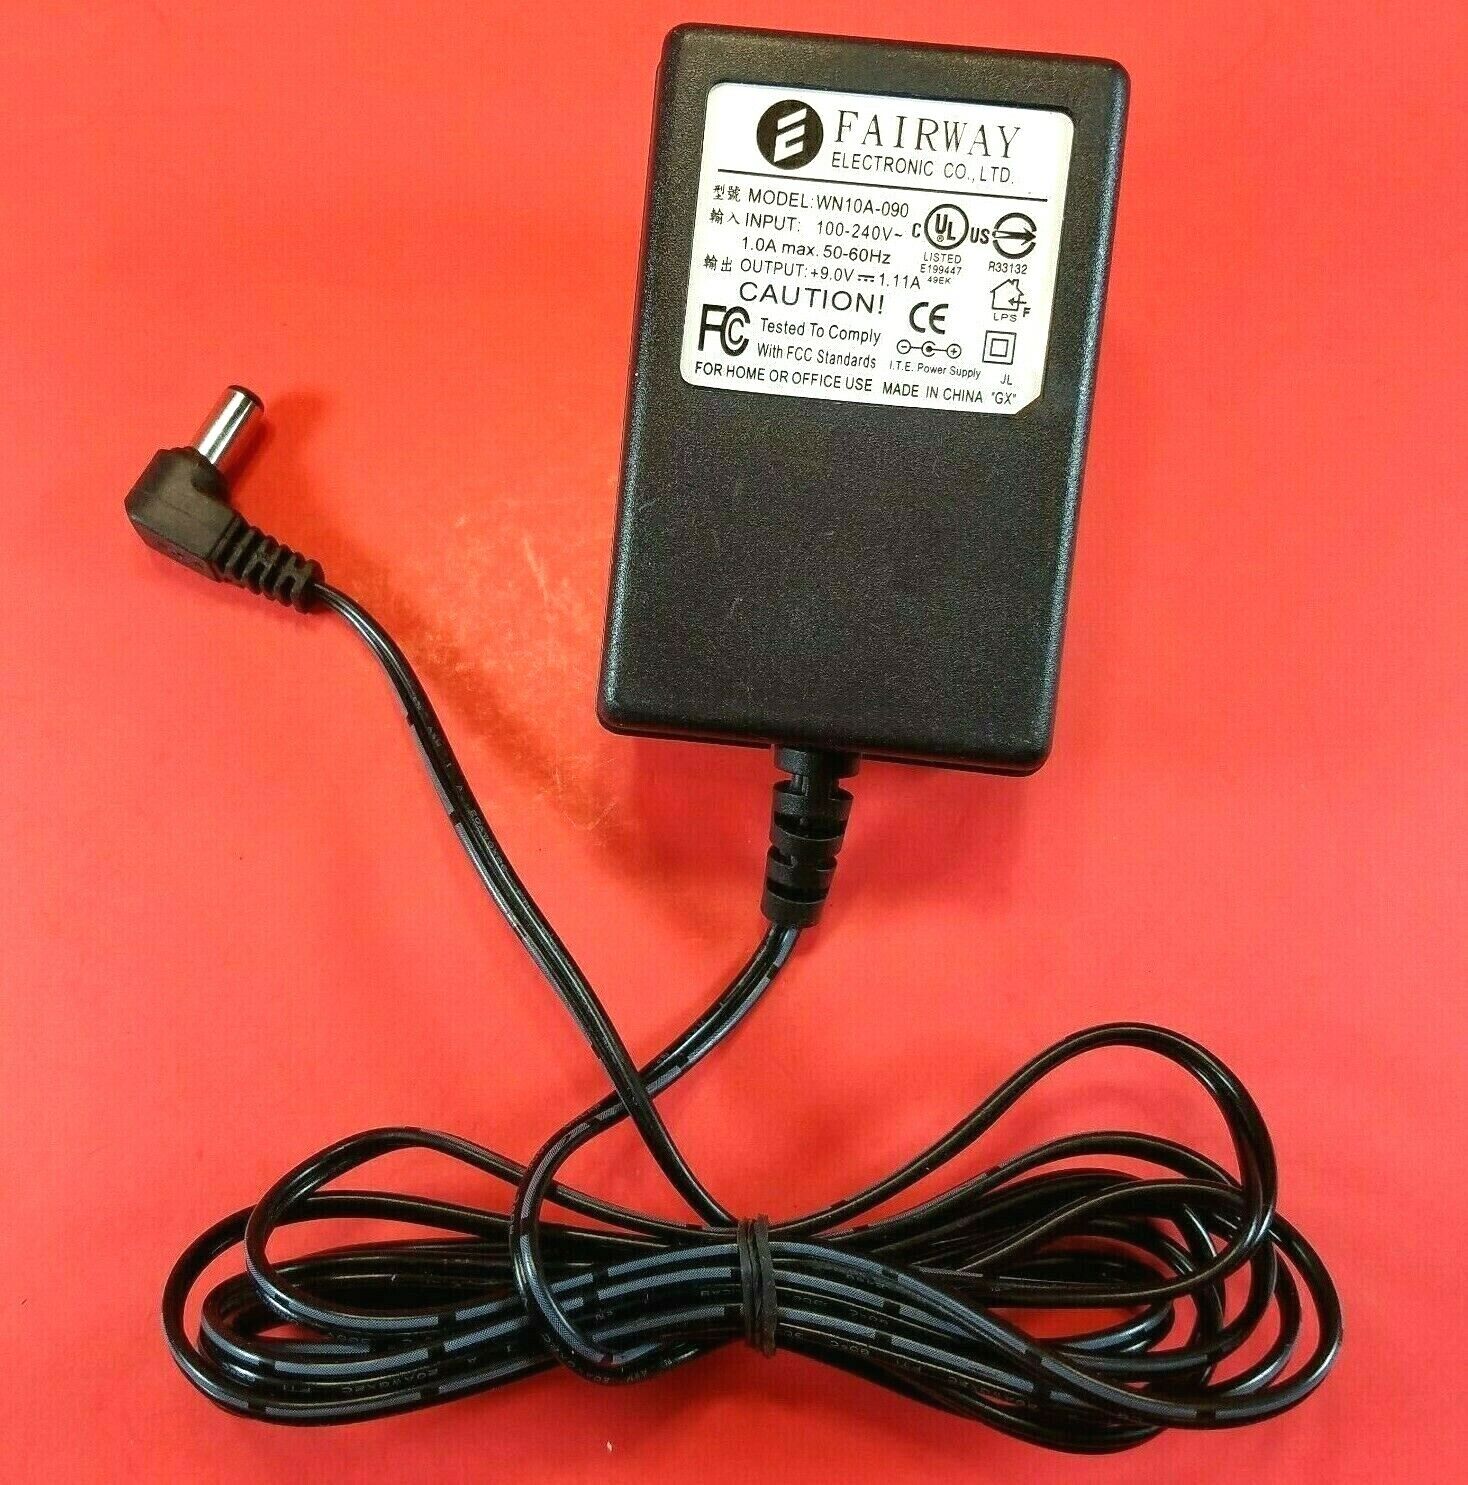 Genuine FAIRWAY Model WN10A-090 Power Supply Adaptor 9V 1.11A OEM AC/DC Adapter Type: AC Adapter Features: Powered M